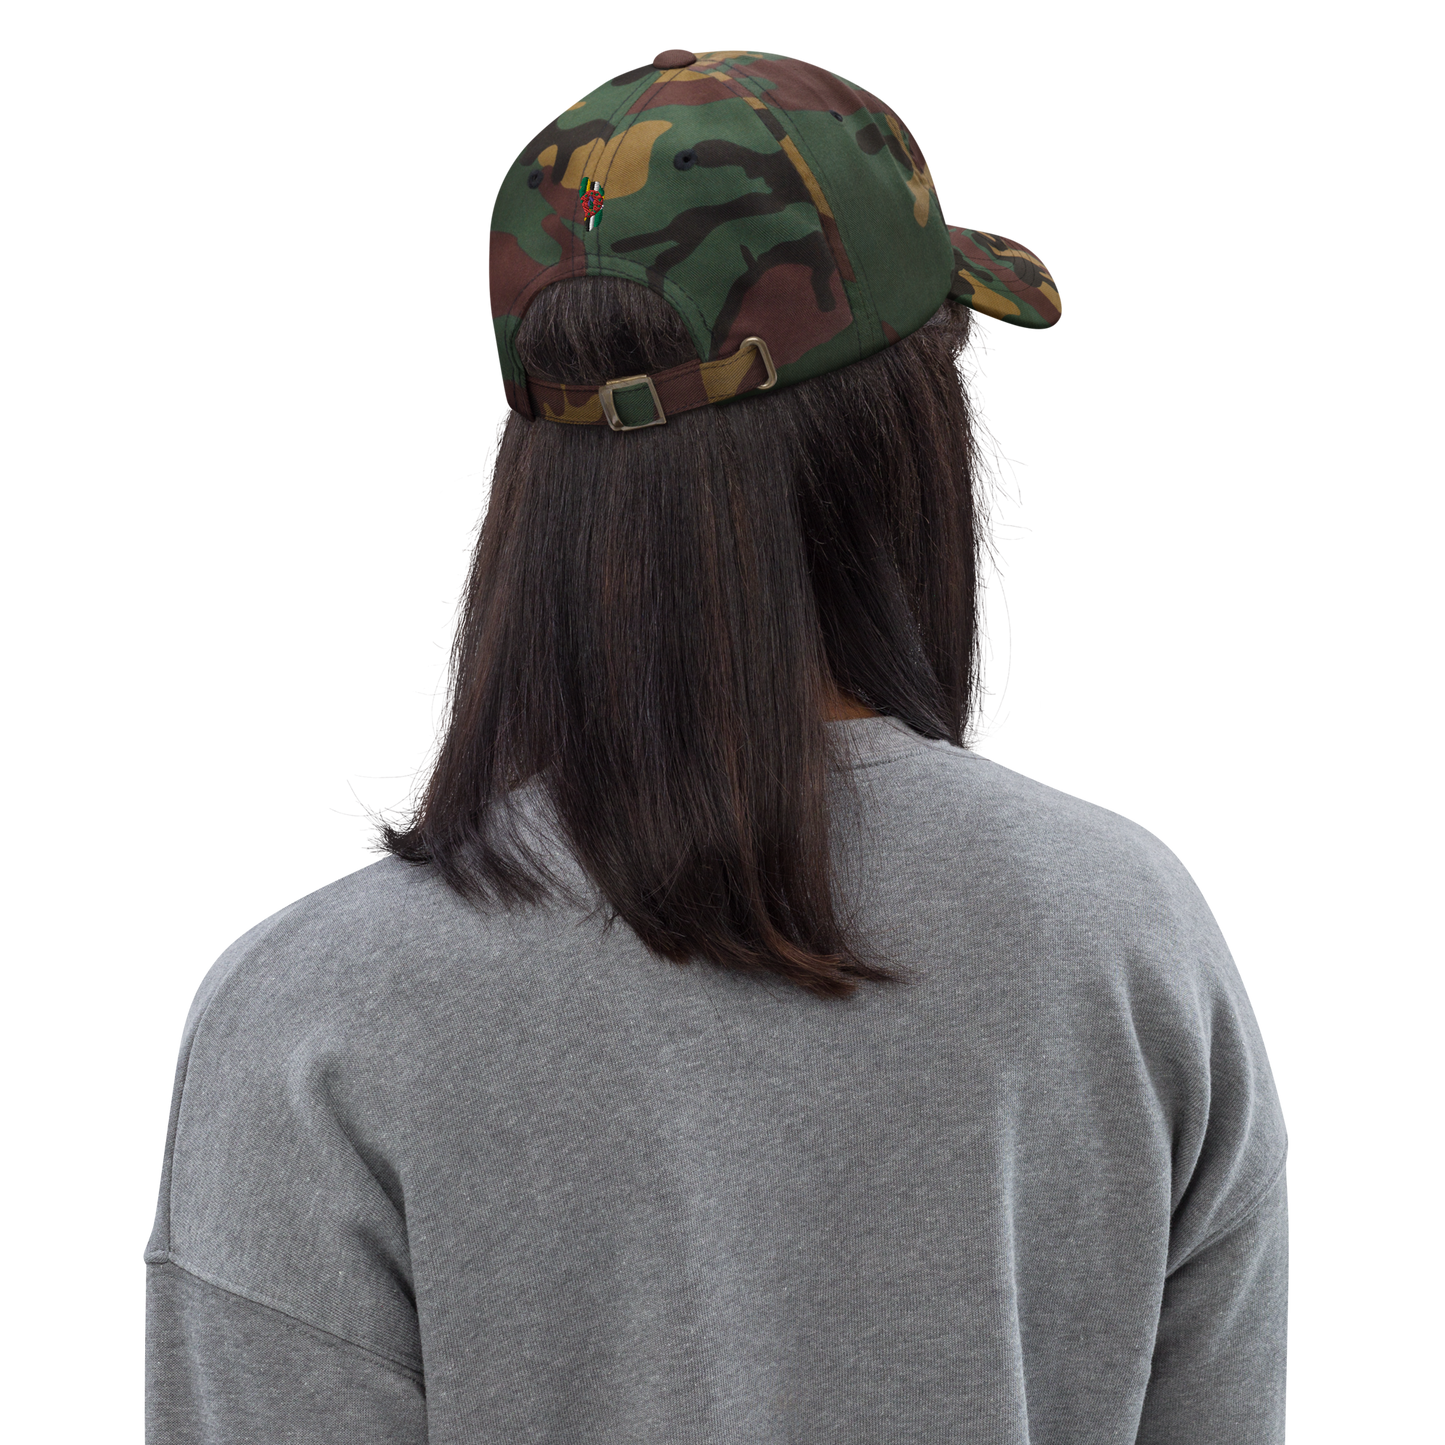 I Am Rooting: Dominica Dad hat